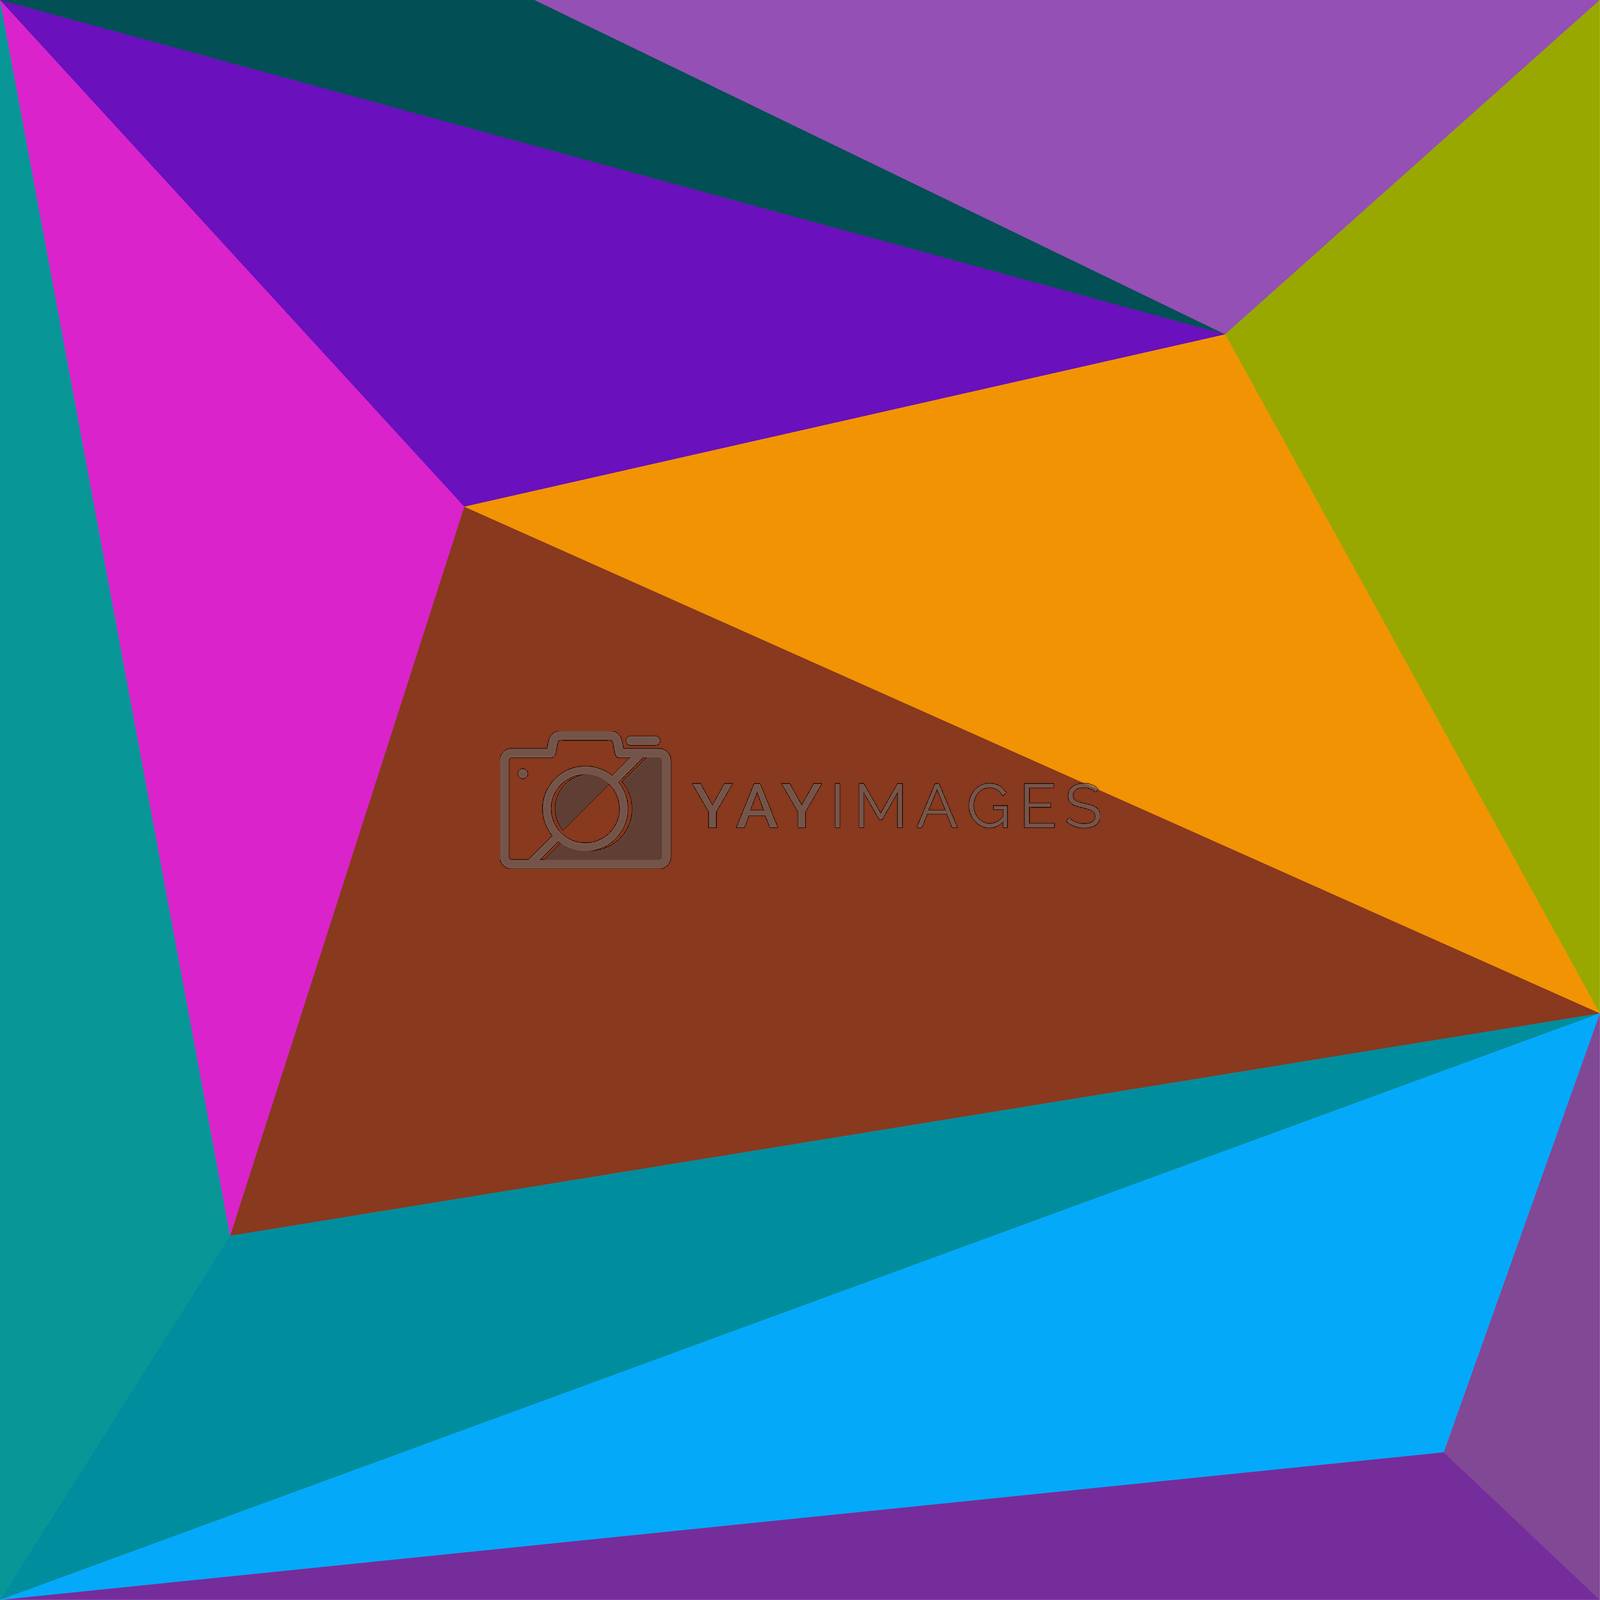 Background with decorative geometric and abstract elements. Vector illustration.